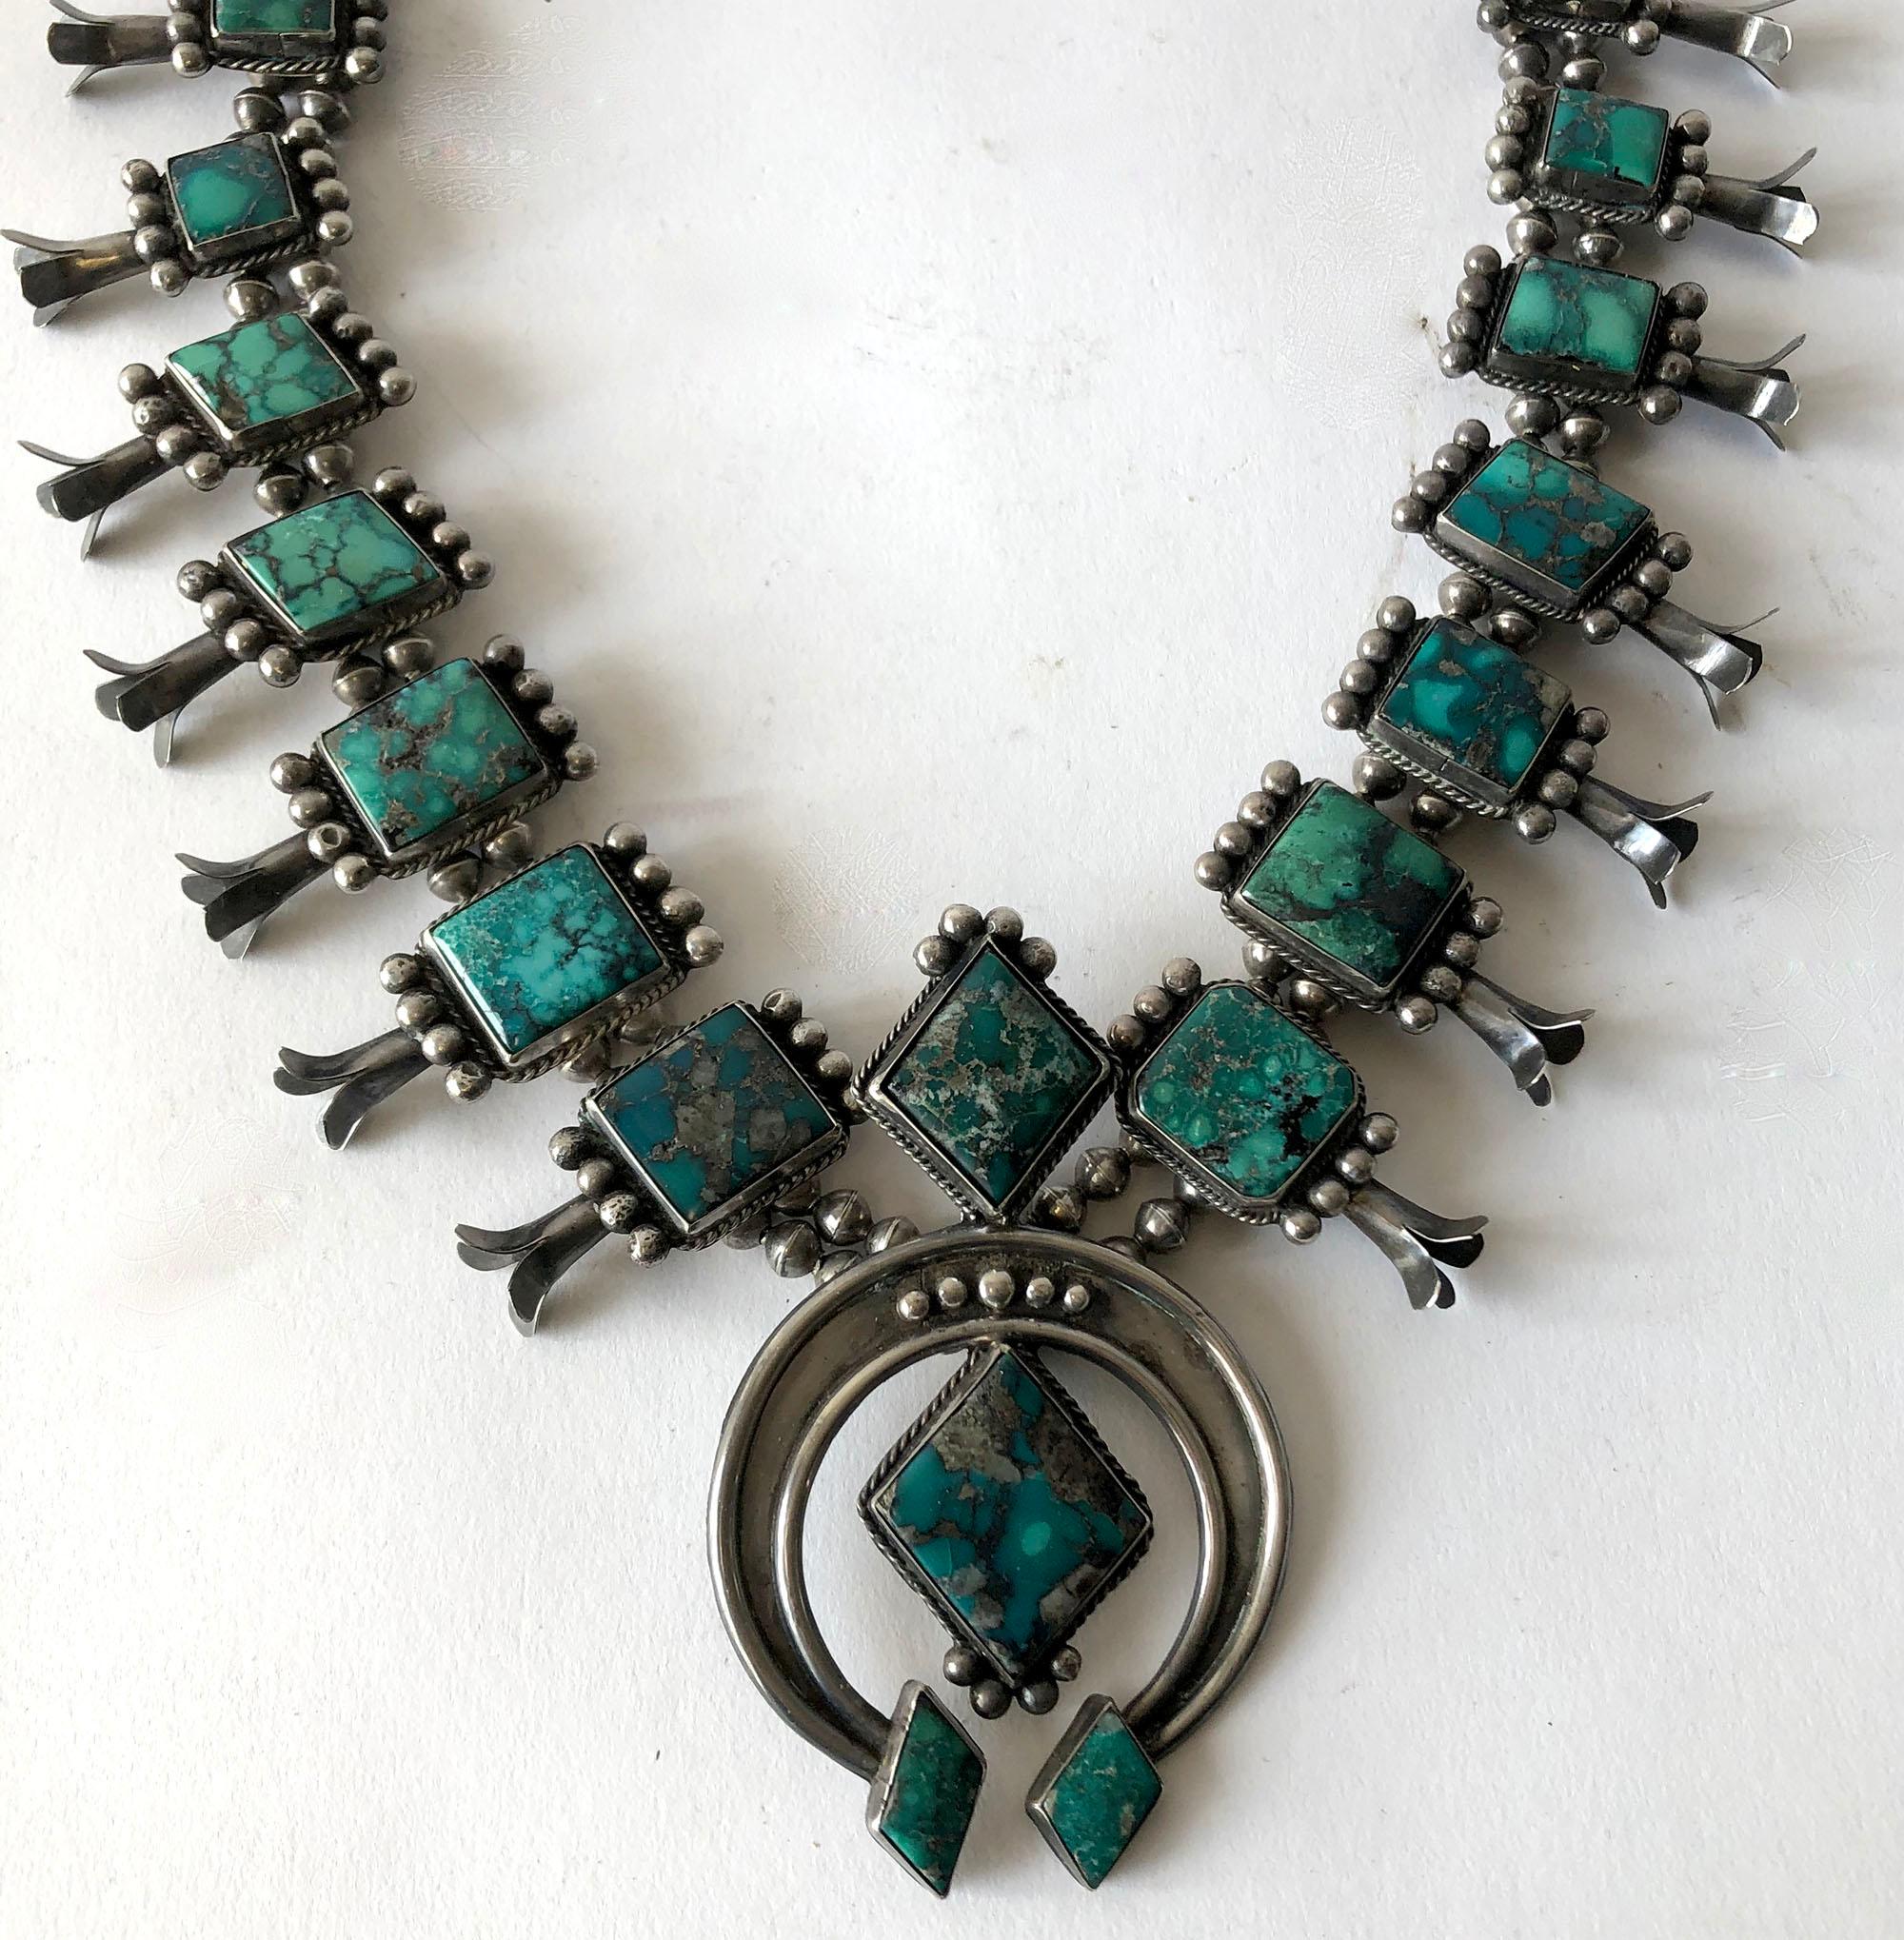 Vintage Navajo squash blossom necklace features a double strand of pearls with large pieces of turquoise, possibly Bisbee, and leaning towards green in color with natural black matrix.  Necklace measures about 26